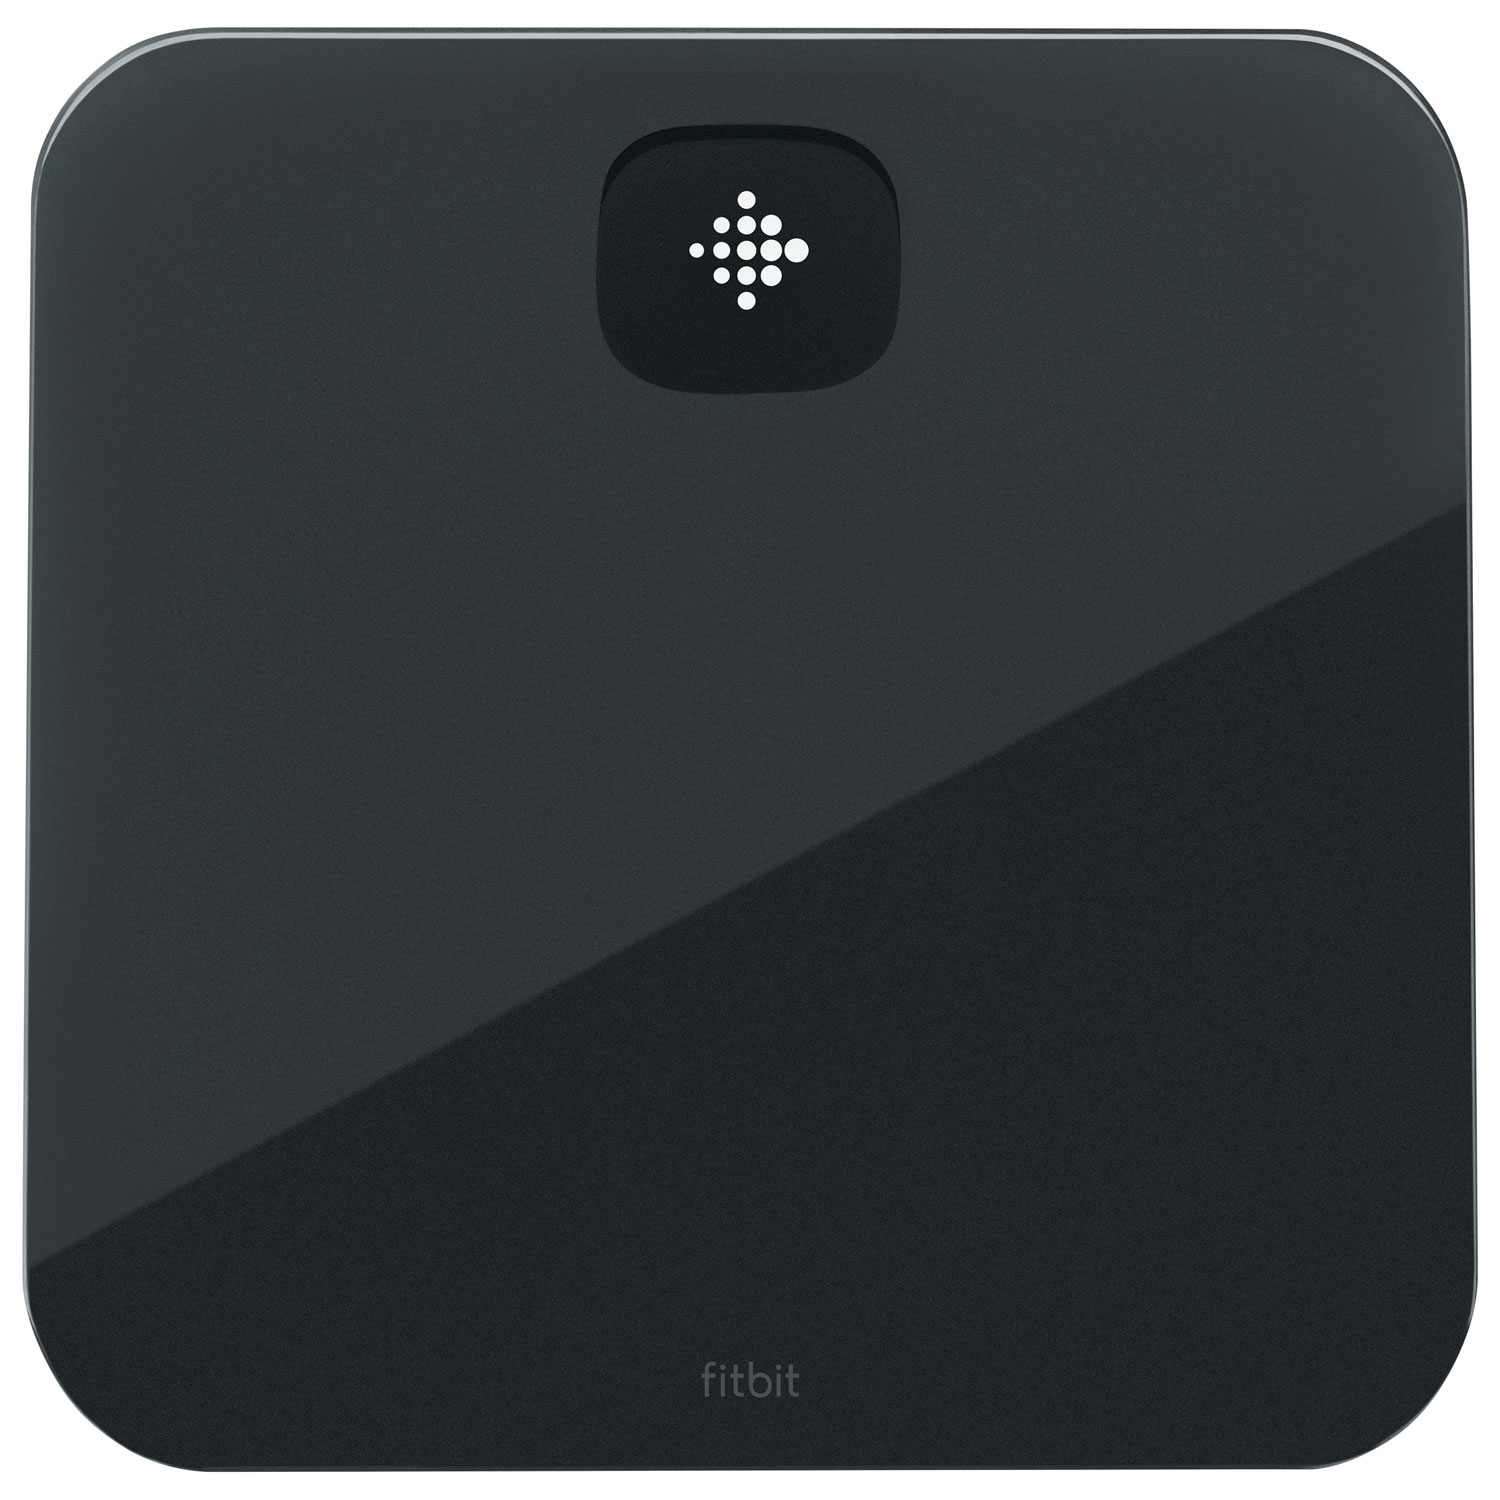 fitbit aria air smart scale stores